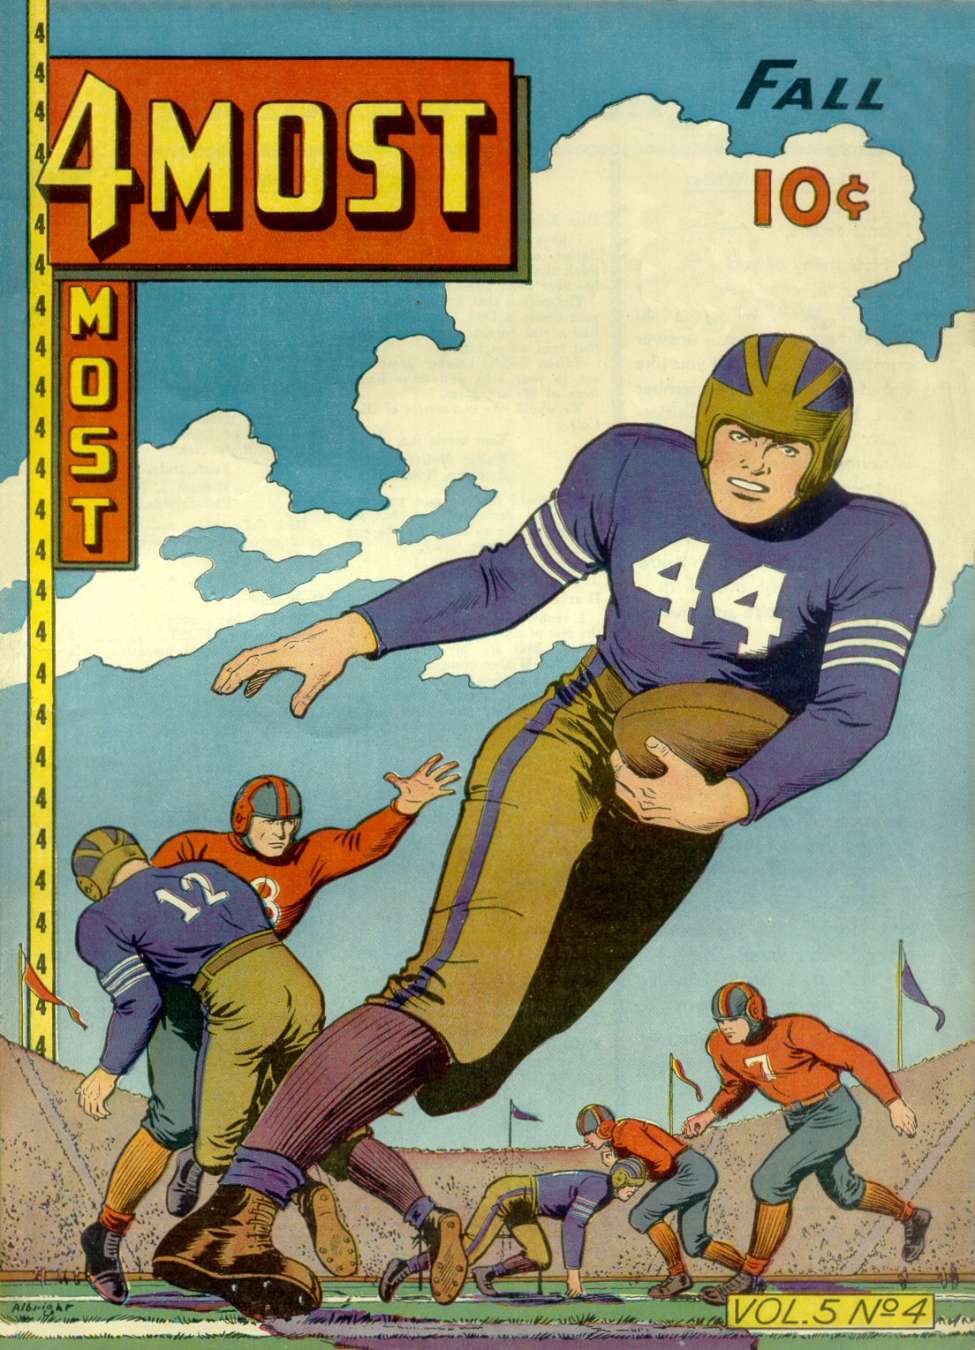 Comic Book Cover For 4Most v5 4